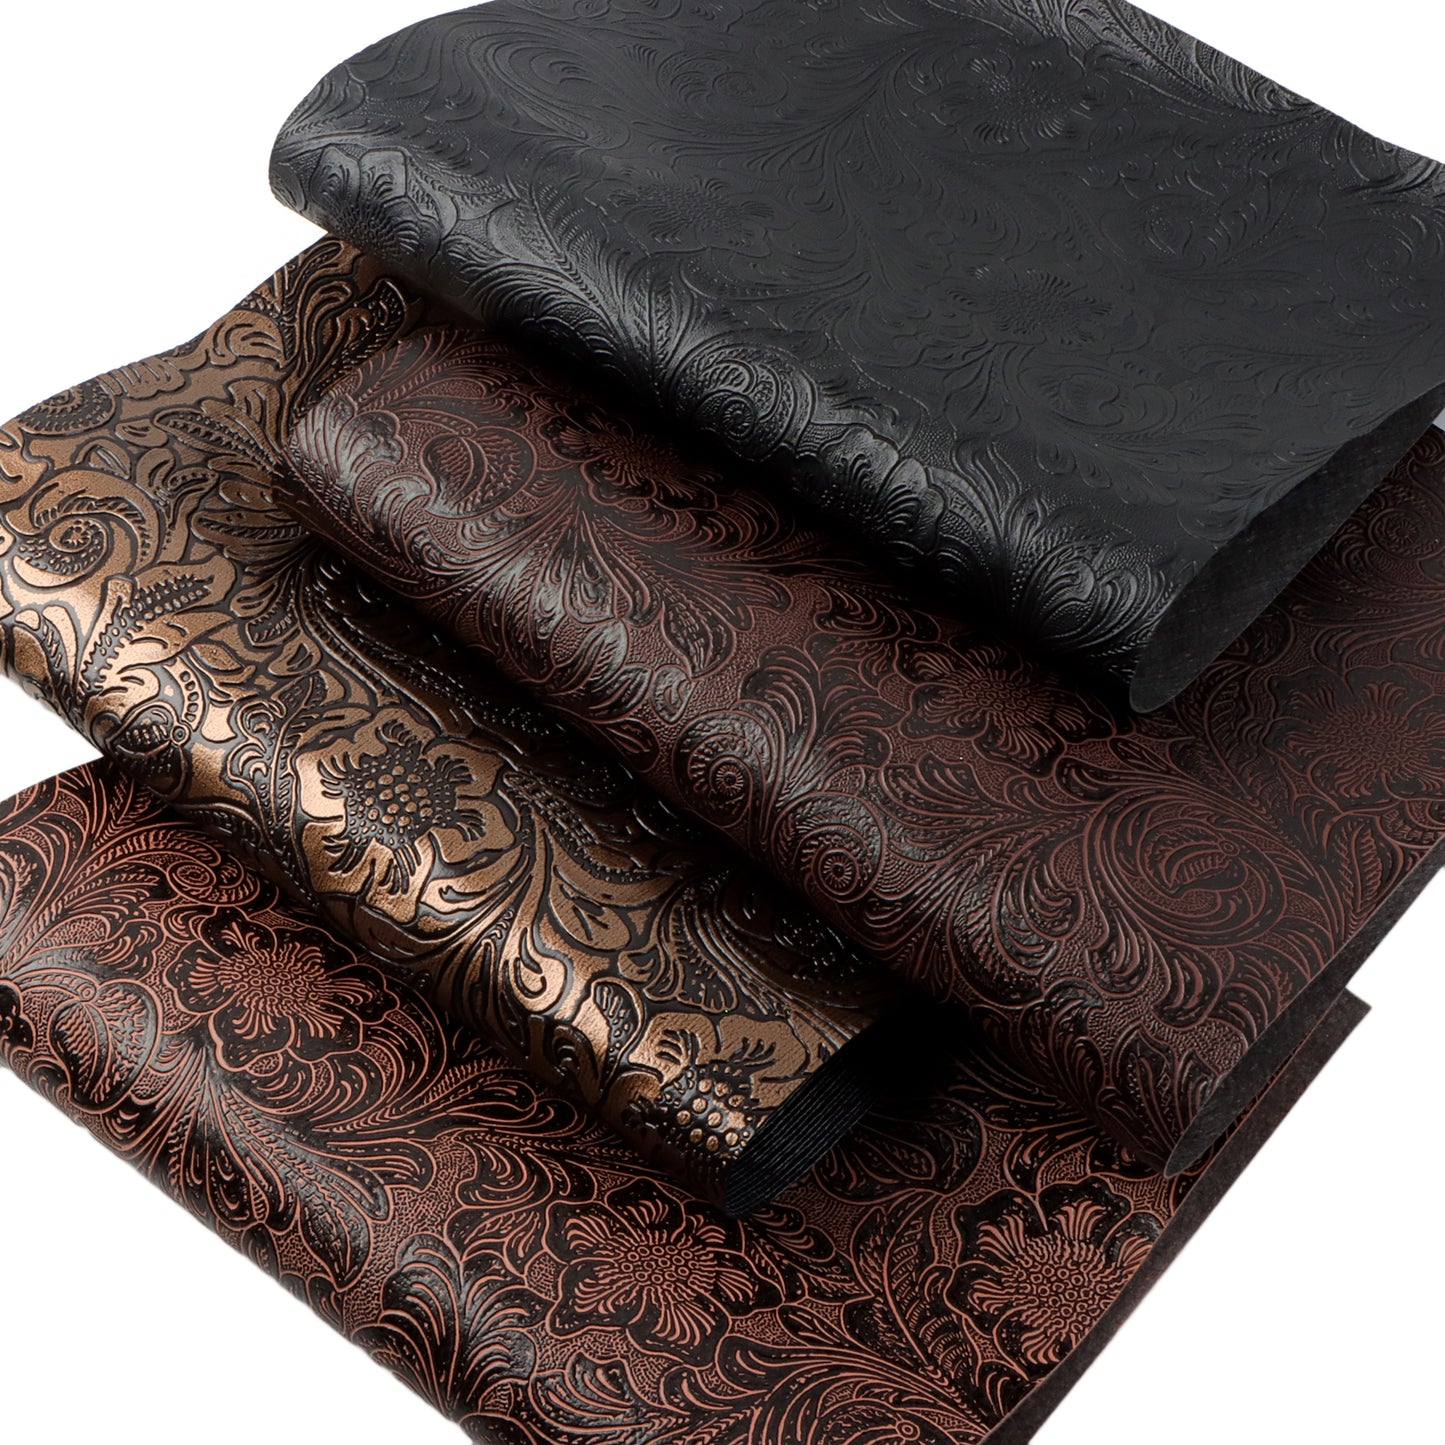 Bump Textured Swirls Faux Leather Sets Wholesale